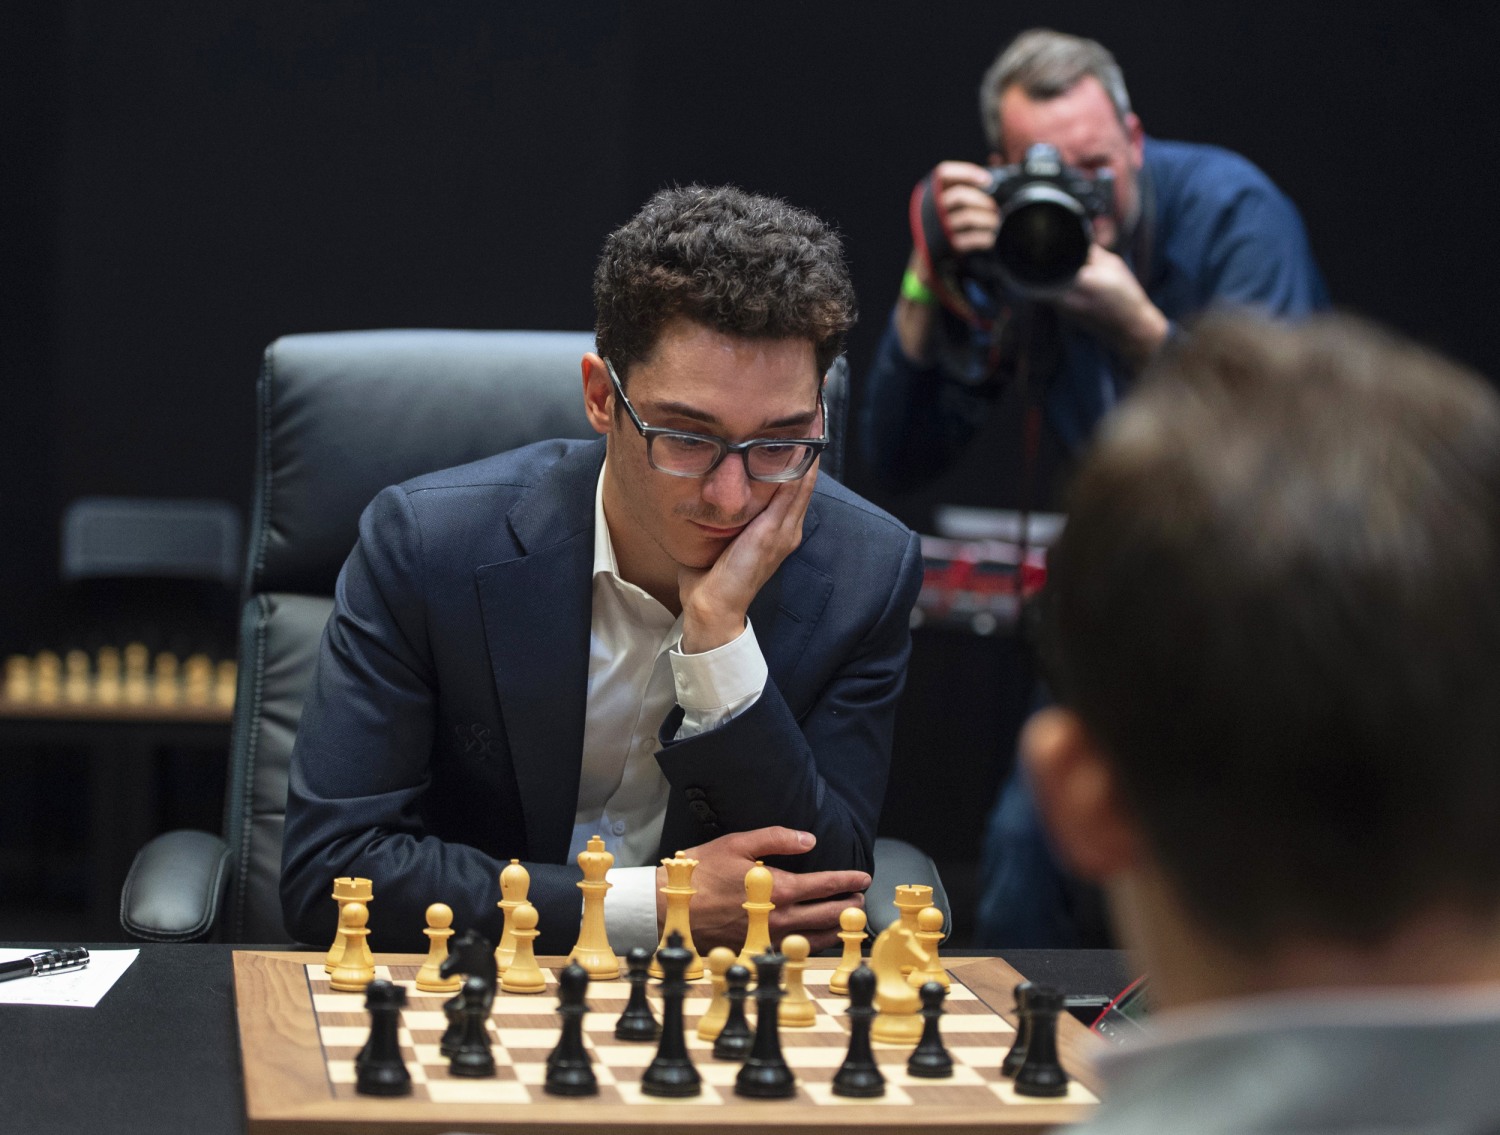 Math predicts Caruana has 39.5% chance of becoming the World Chess Champion